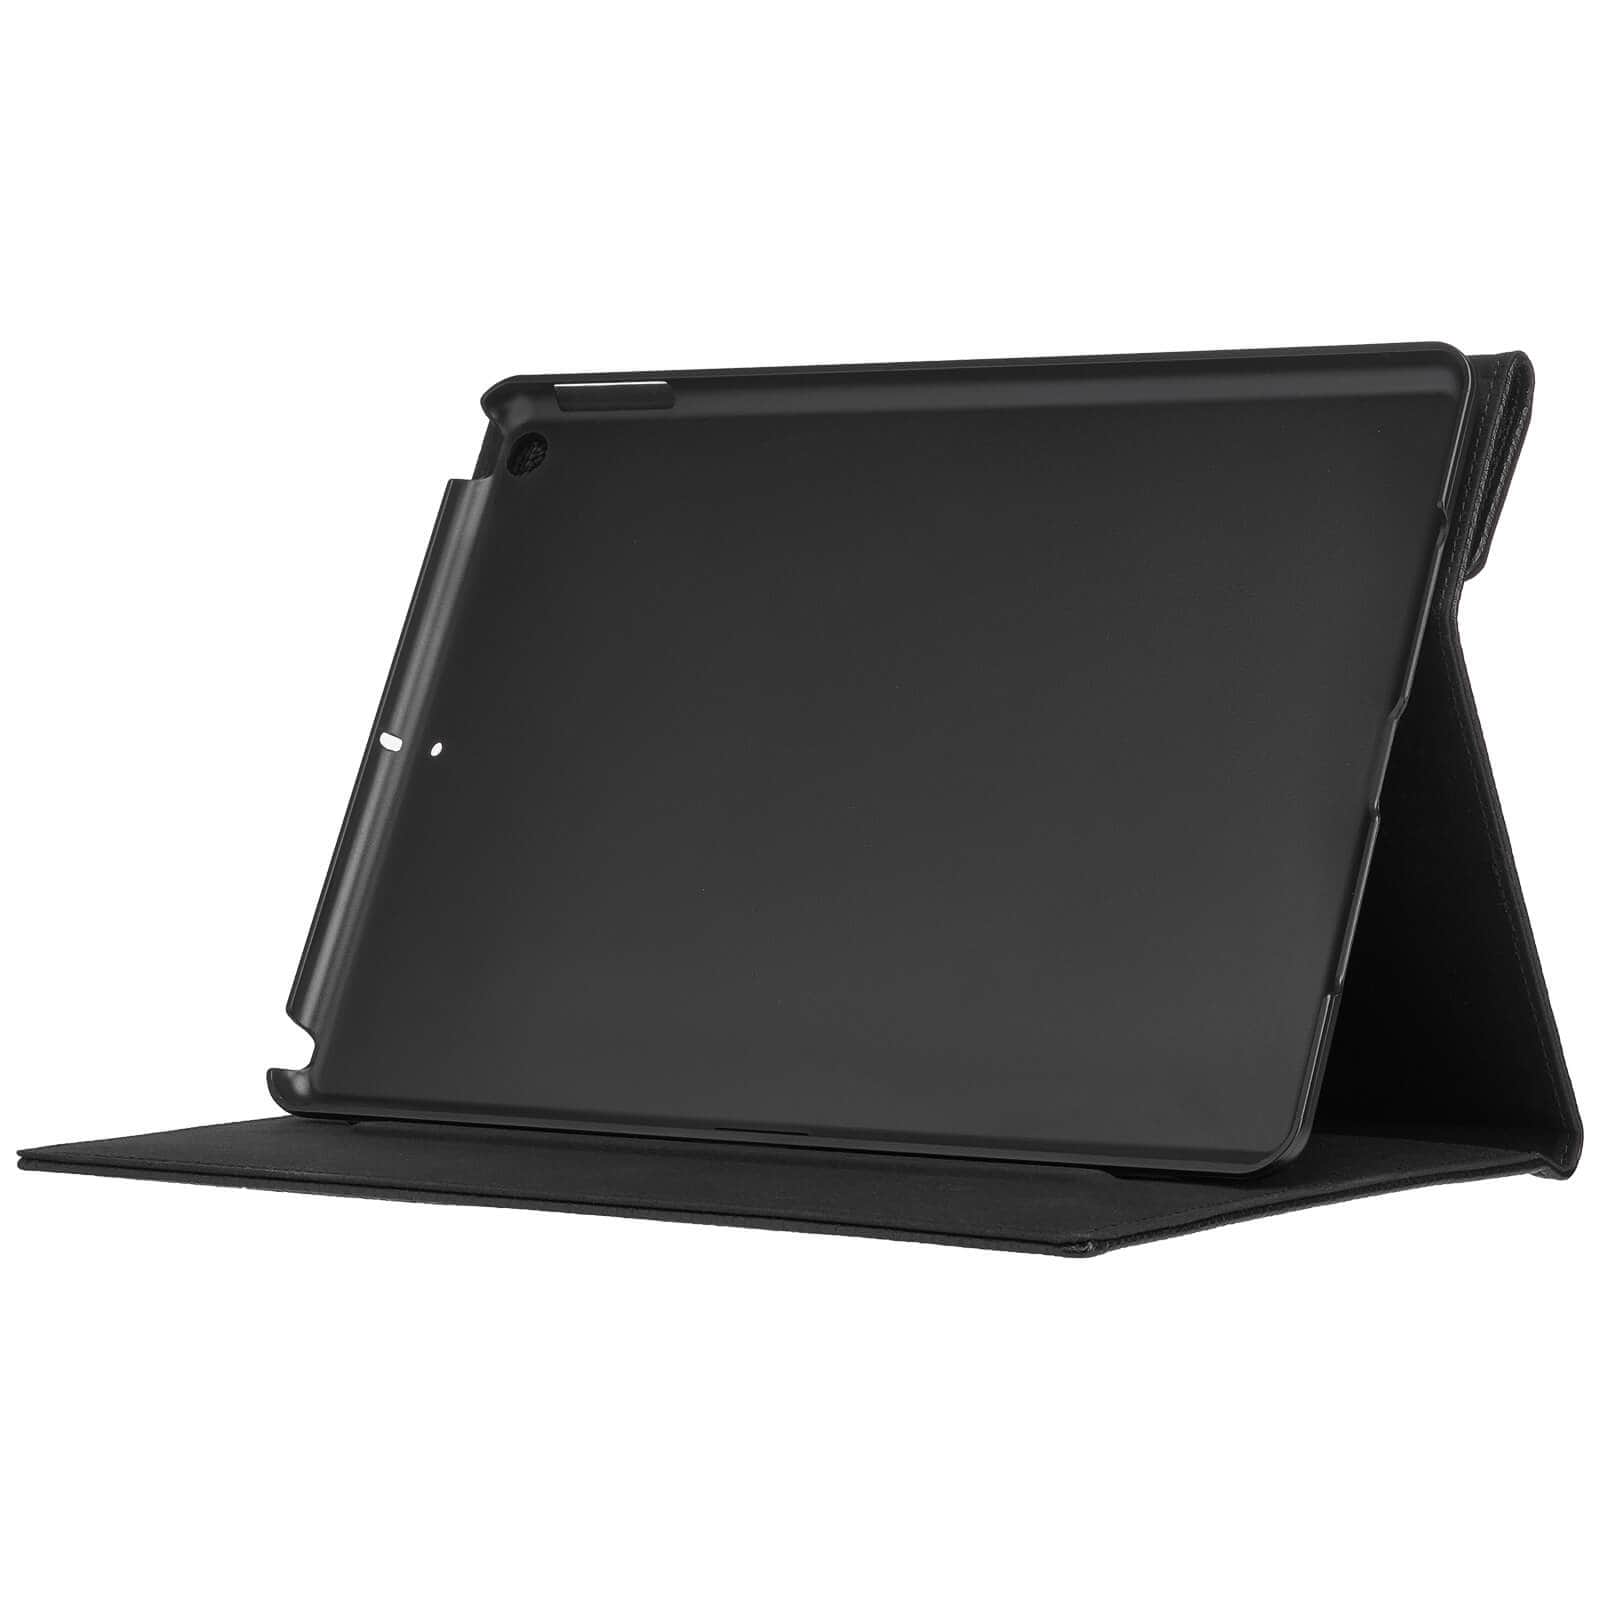 Case props iPad up horizontally. color::Black